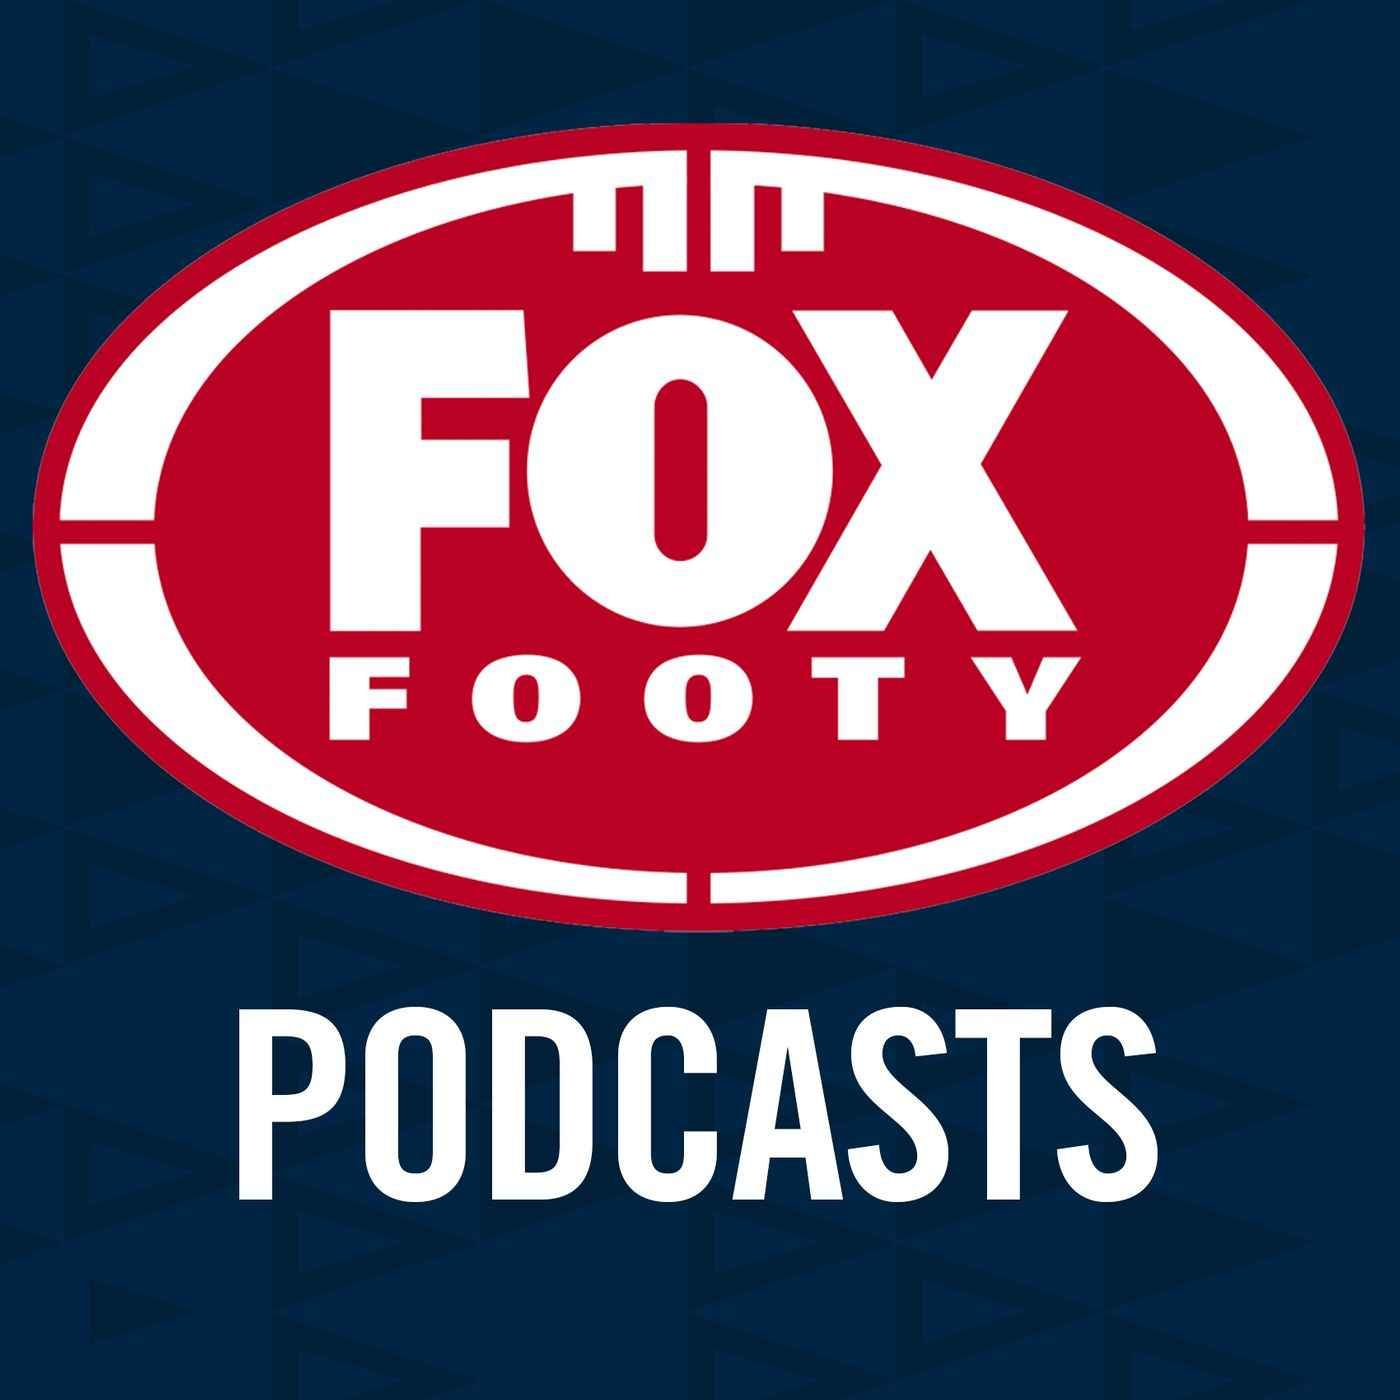 Fox Footy Live: Josh Jenkins from the Cats speaks about the salary cap discussions